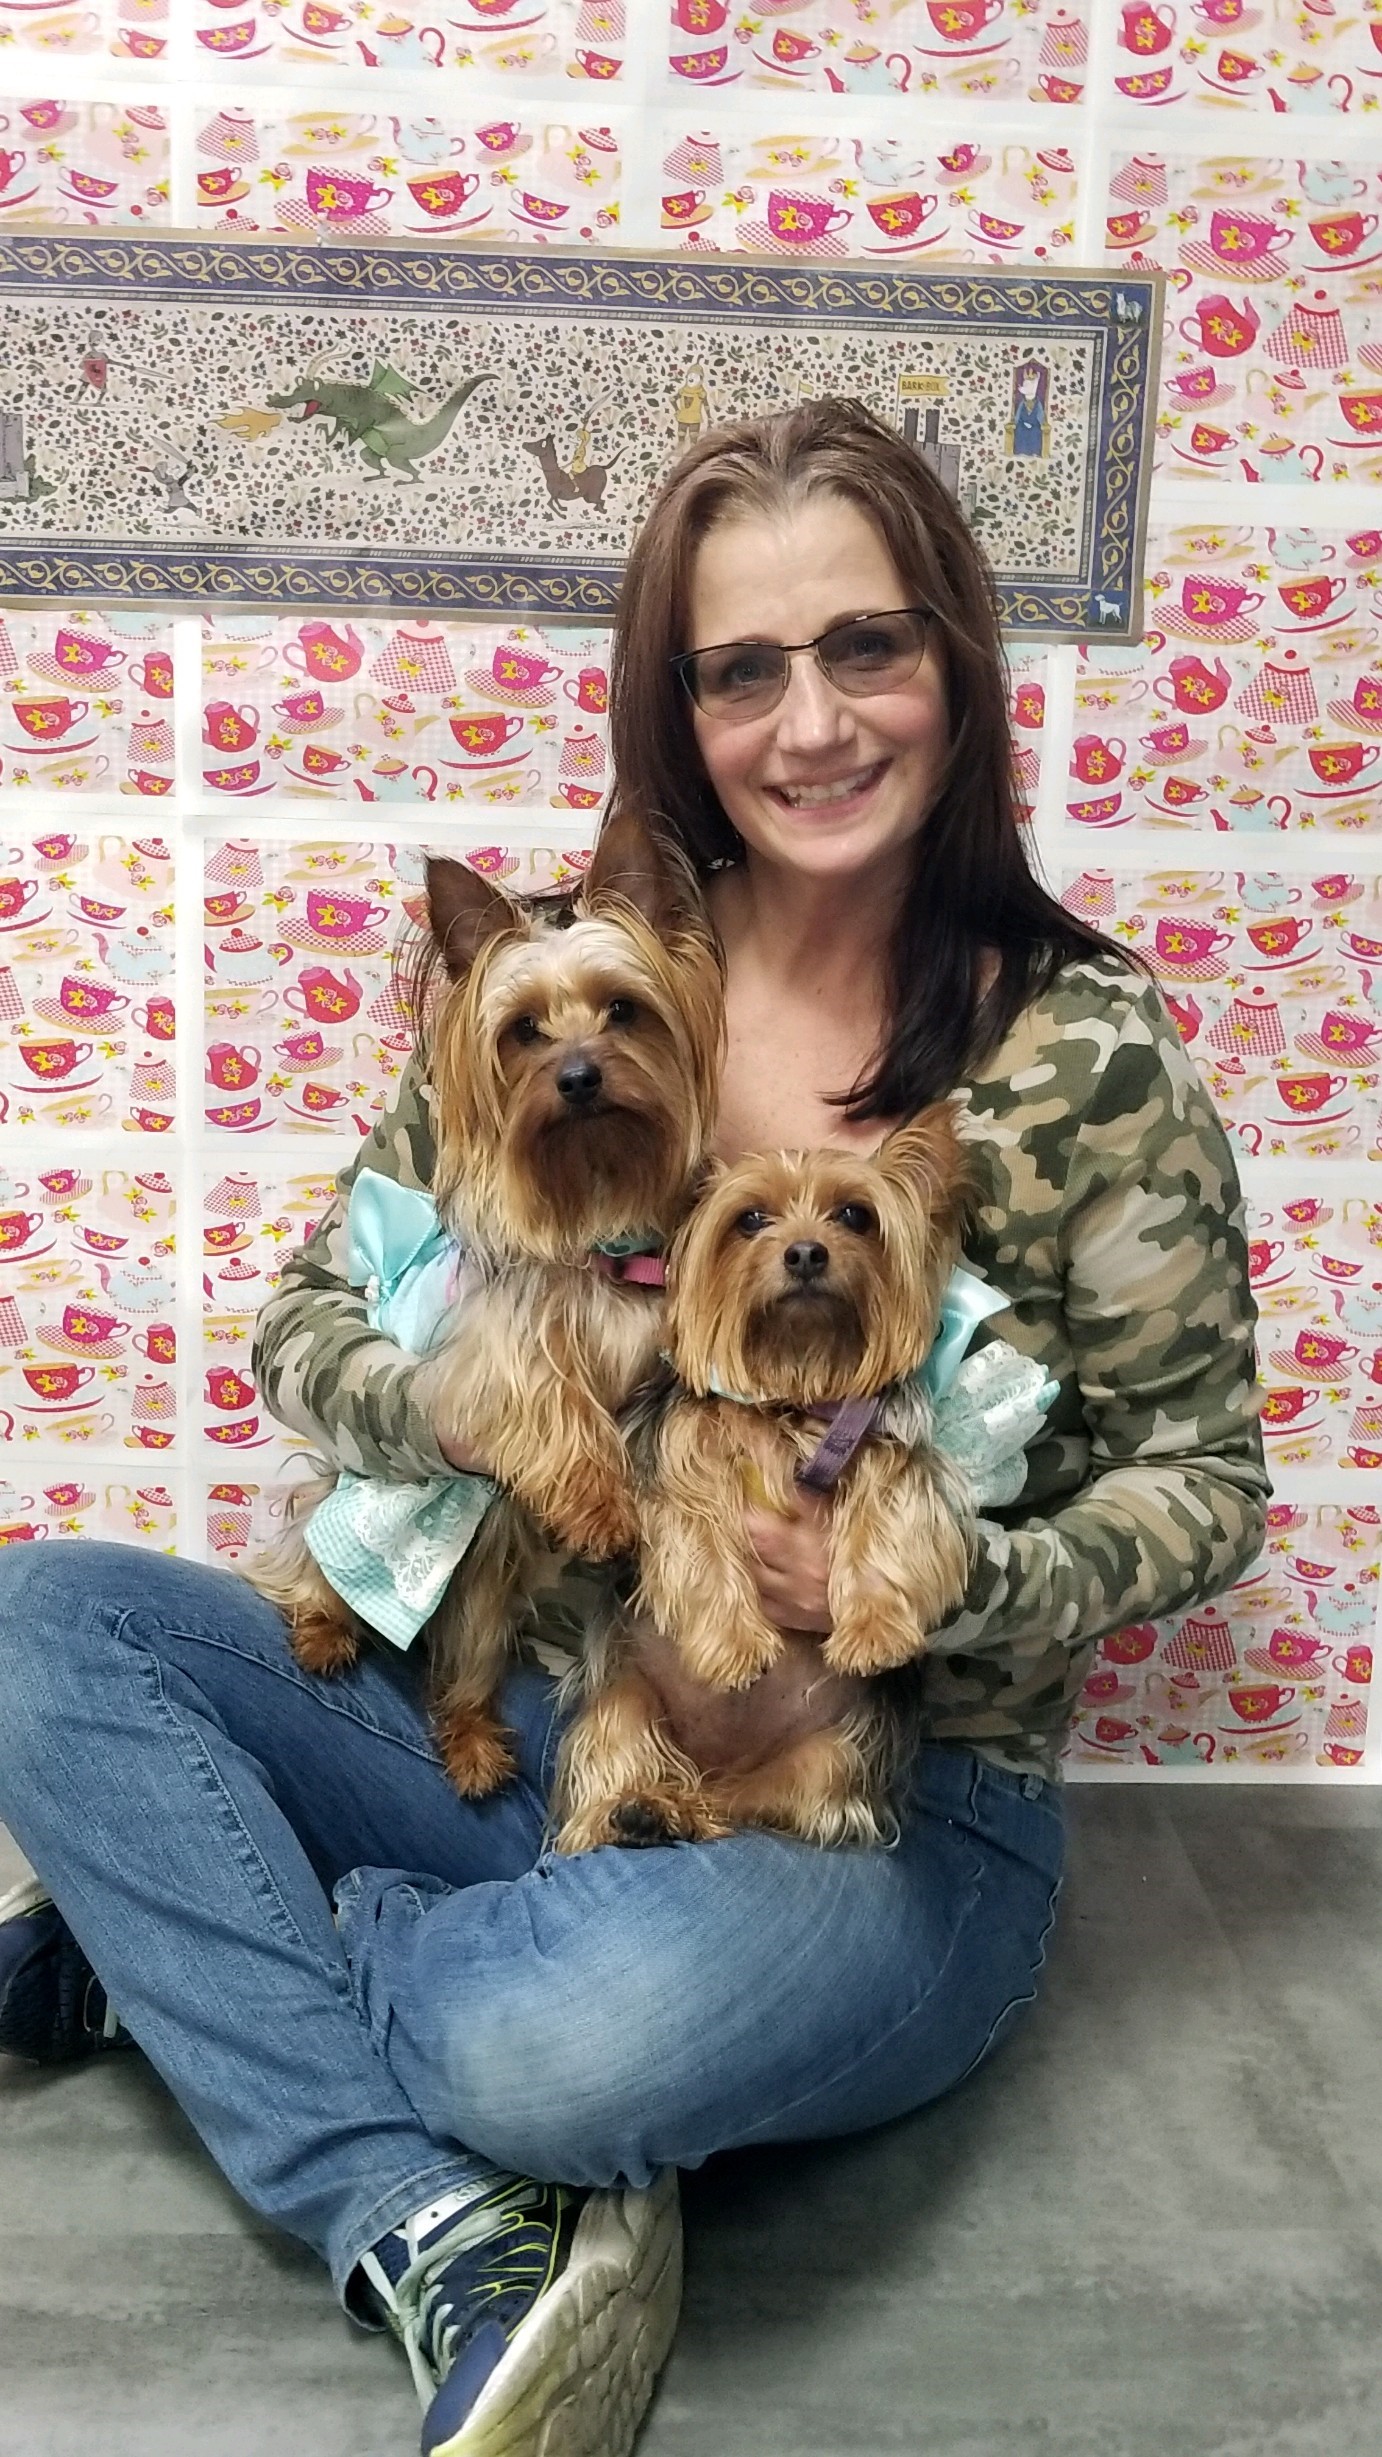 Kimberly Bandusky of Burbank, Illinois placed first in the Blue Buffalo Give Back Program. She's volunteered thousands of hours training shelter dogs for adoption.